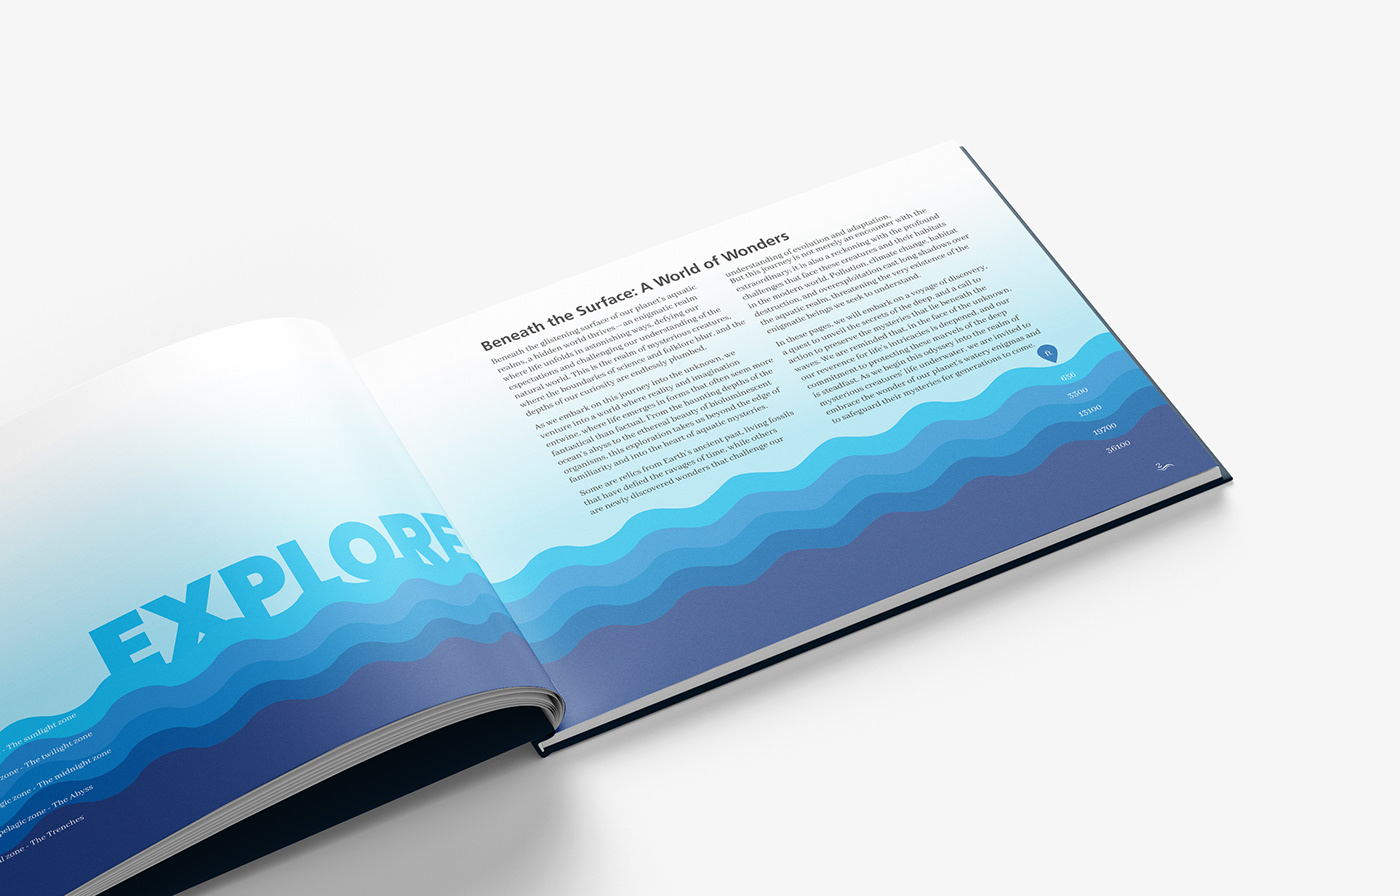 COFFEE TABLE BOOK Layout Design publication design editorial student project beneath the waves Underwater book